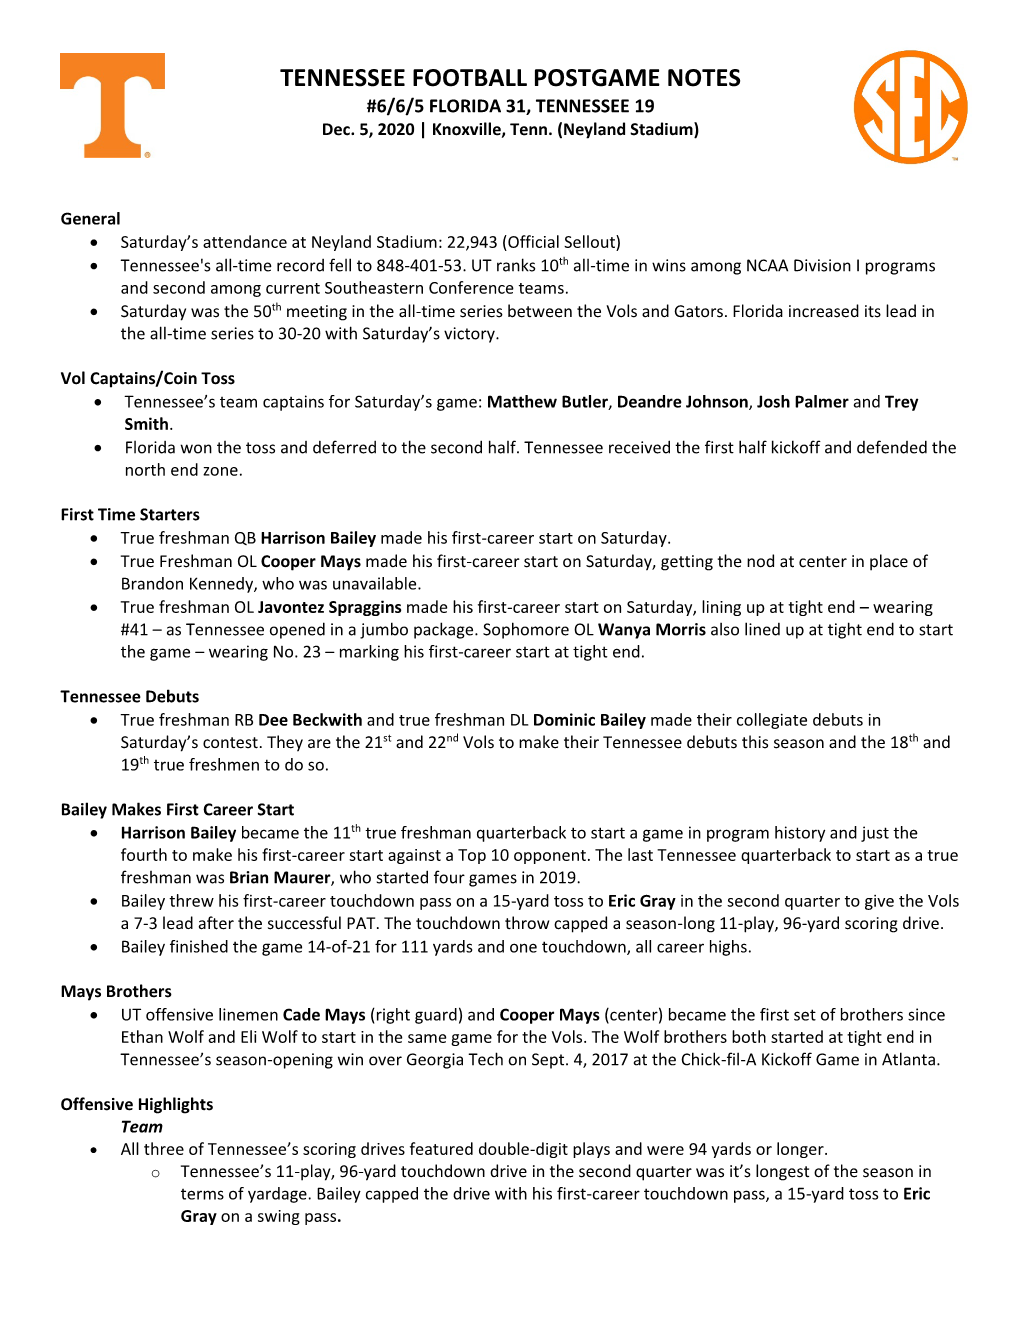 TENNESSEE FOOTBALL POSTGAME NOTES #6/6/5 FLORIDA 31, TENNESSEE 19 Dec